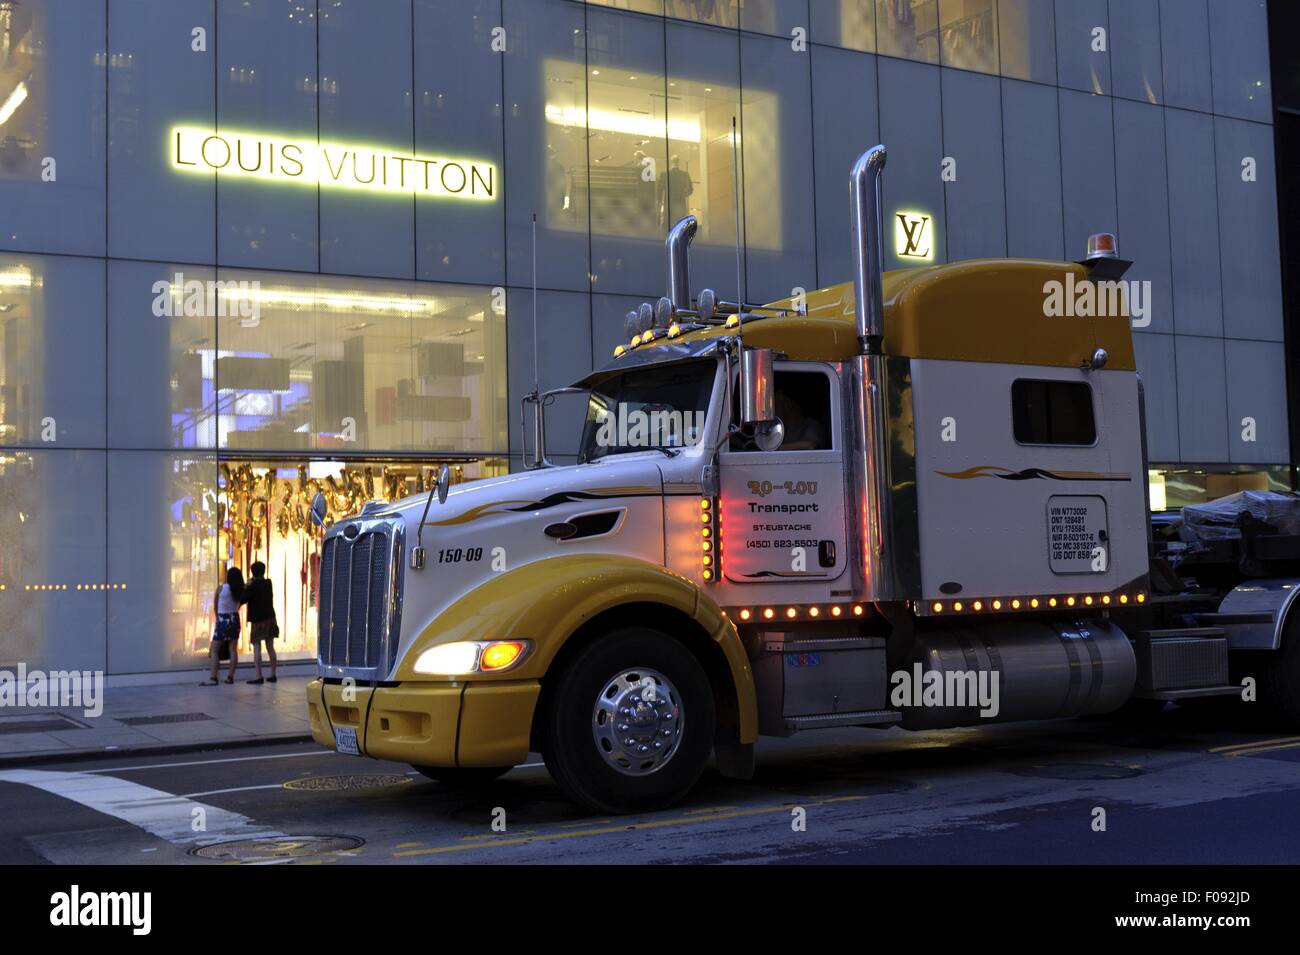 Truck in front of Louis Vuitton store, New York Stock Photo - Alamy